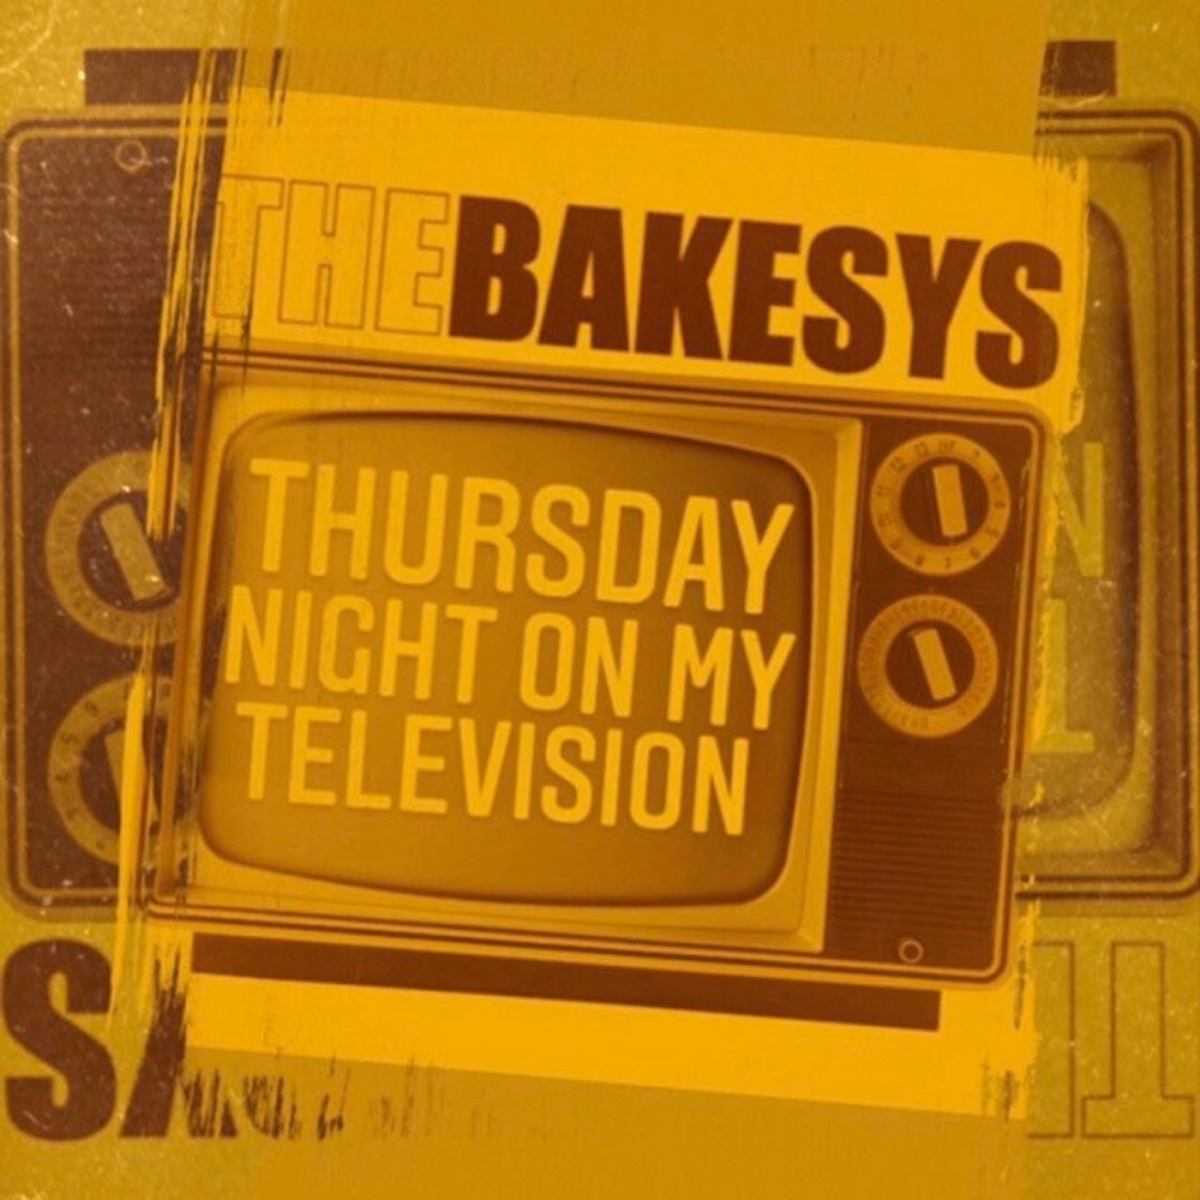 The Bakesys, Thursday Night on my Television